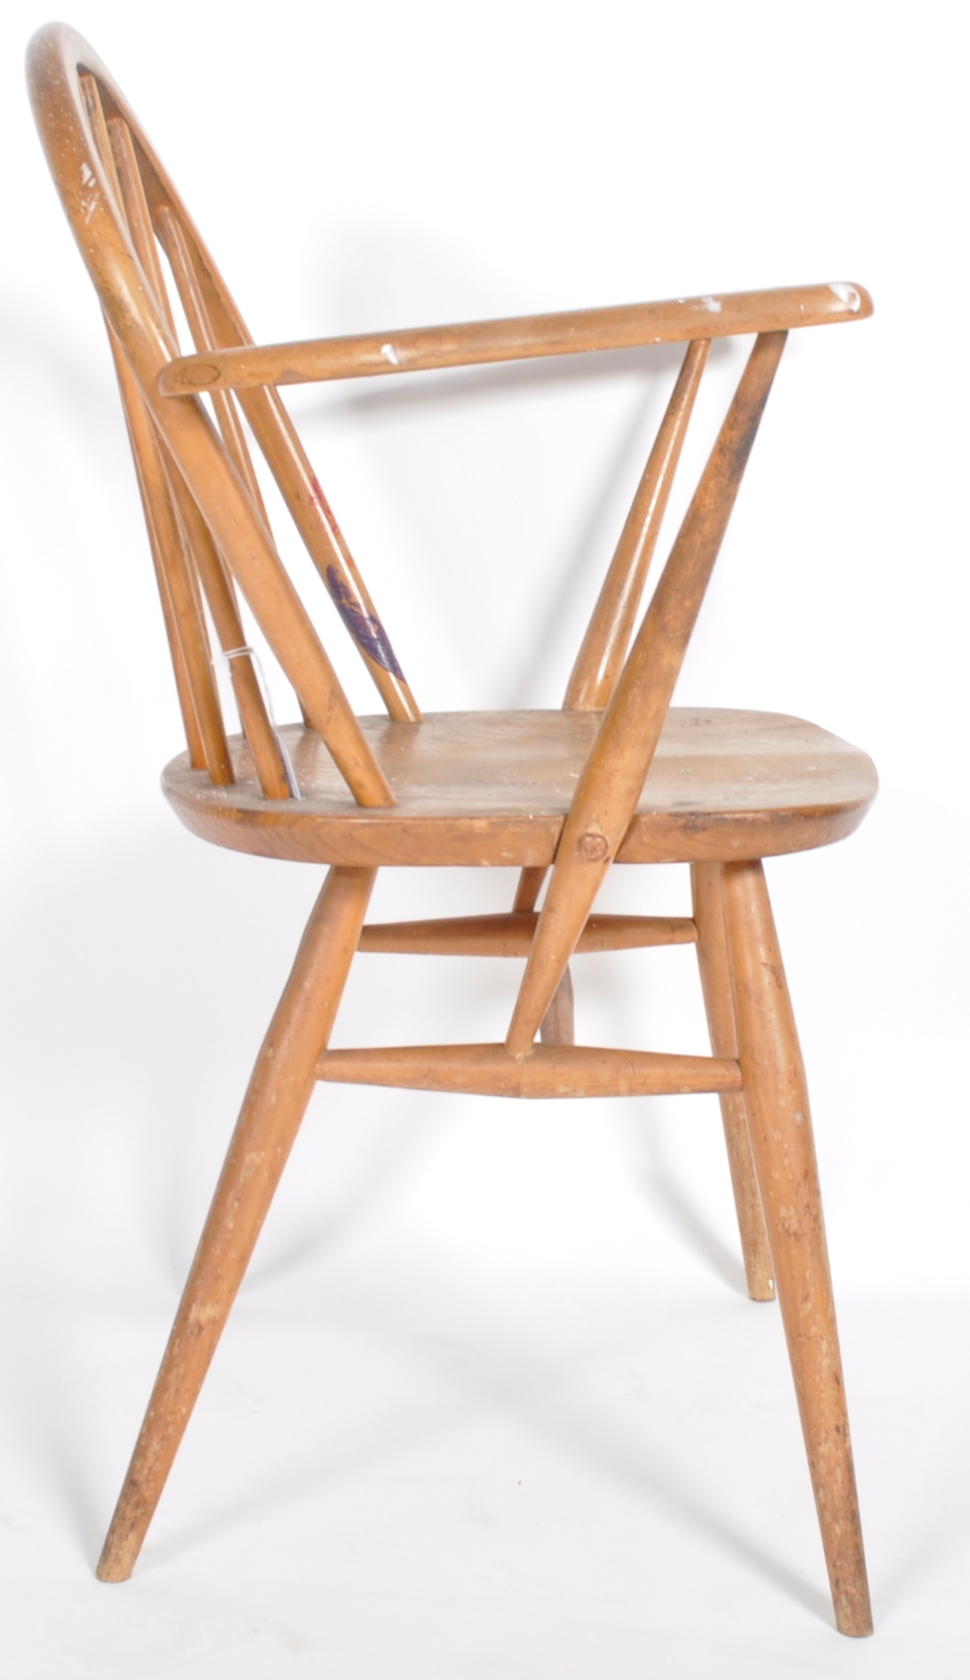 ERCOL - WINDSOR MODEL - 60s BEACH AND ELM CARVER ARMCHAIR - Image 5 of 6